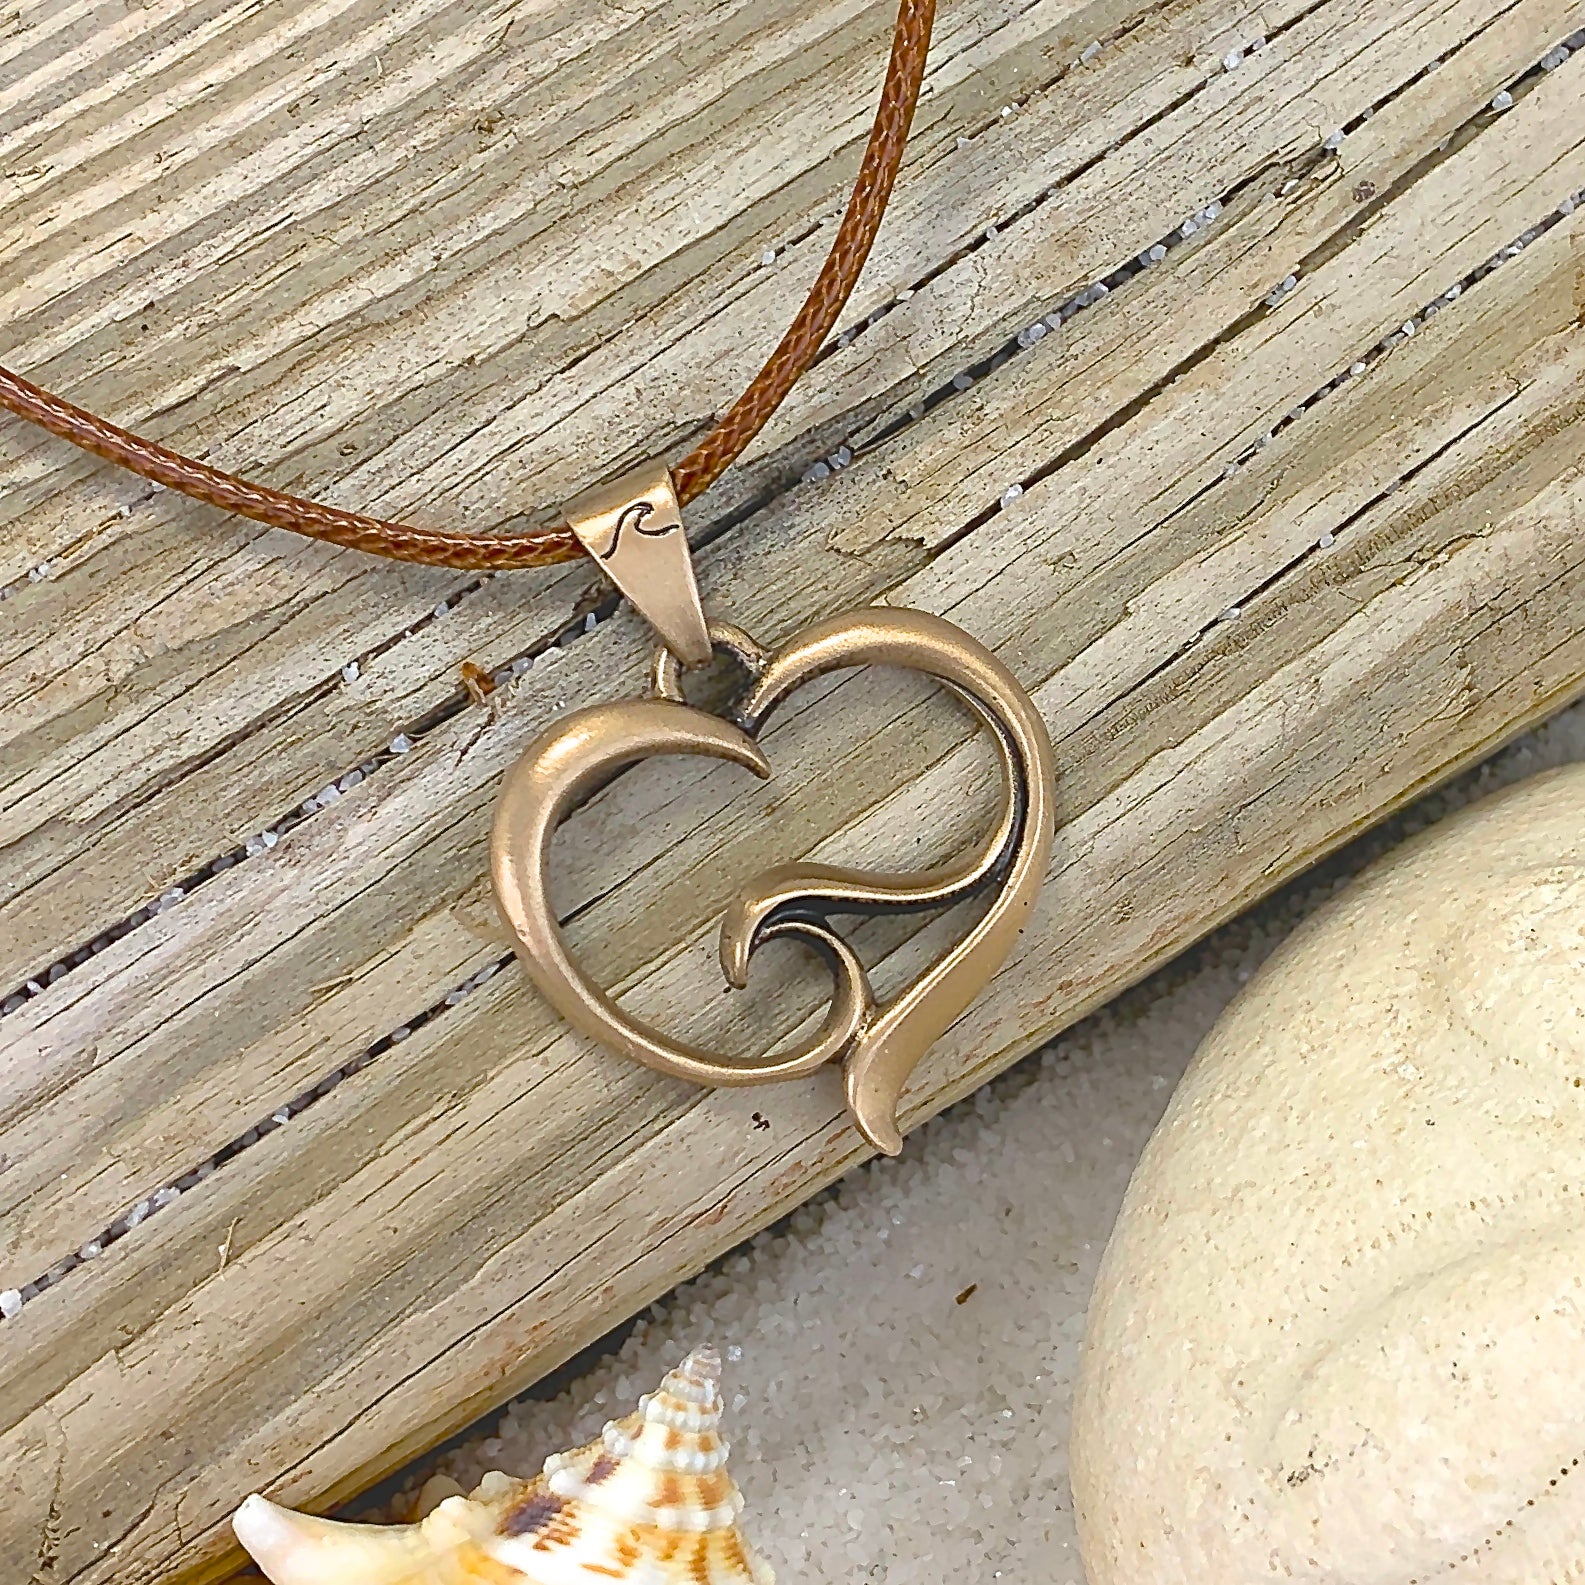 Ocean Wave Necklace for Women - Heart of The Ocean Pendant, Ocean Lover Gifts, Sea Life Jewelry, Heart with Wave Necklace 22 inch